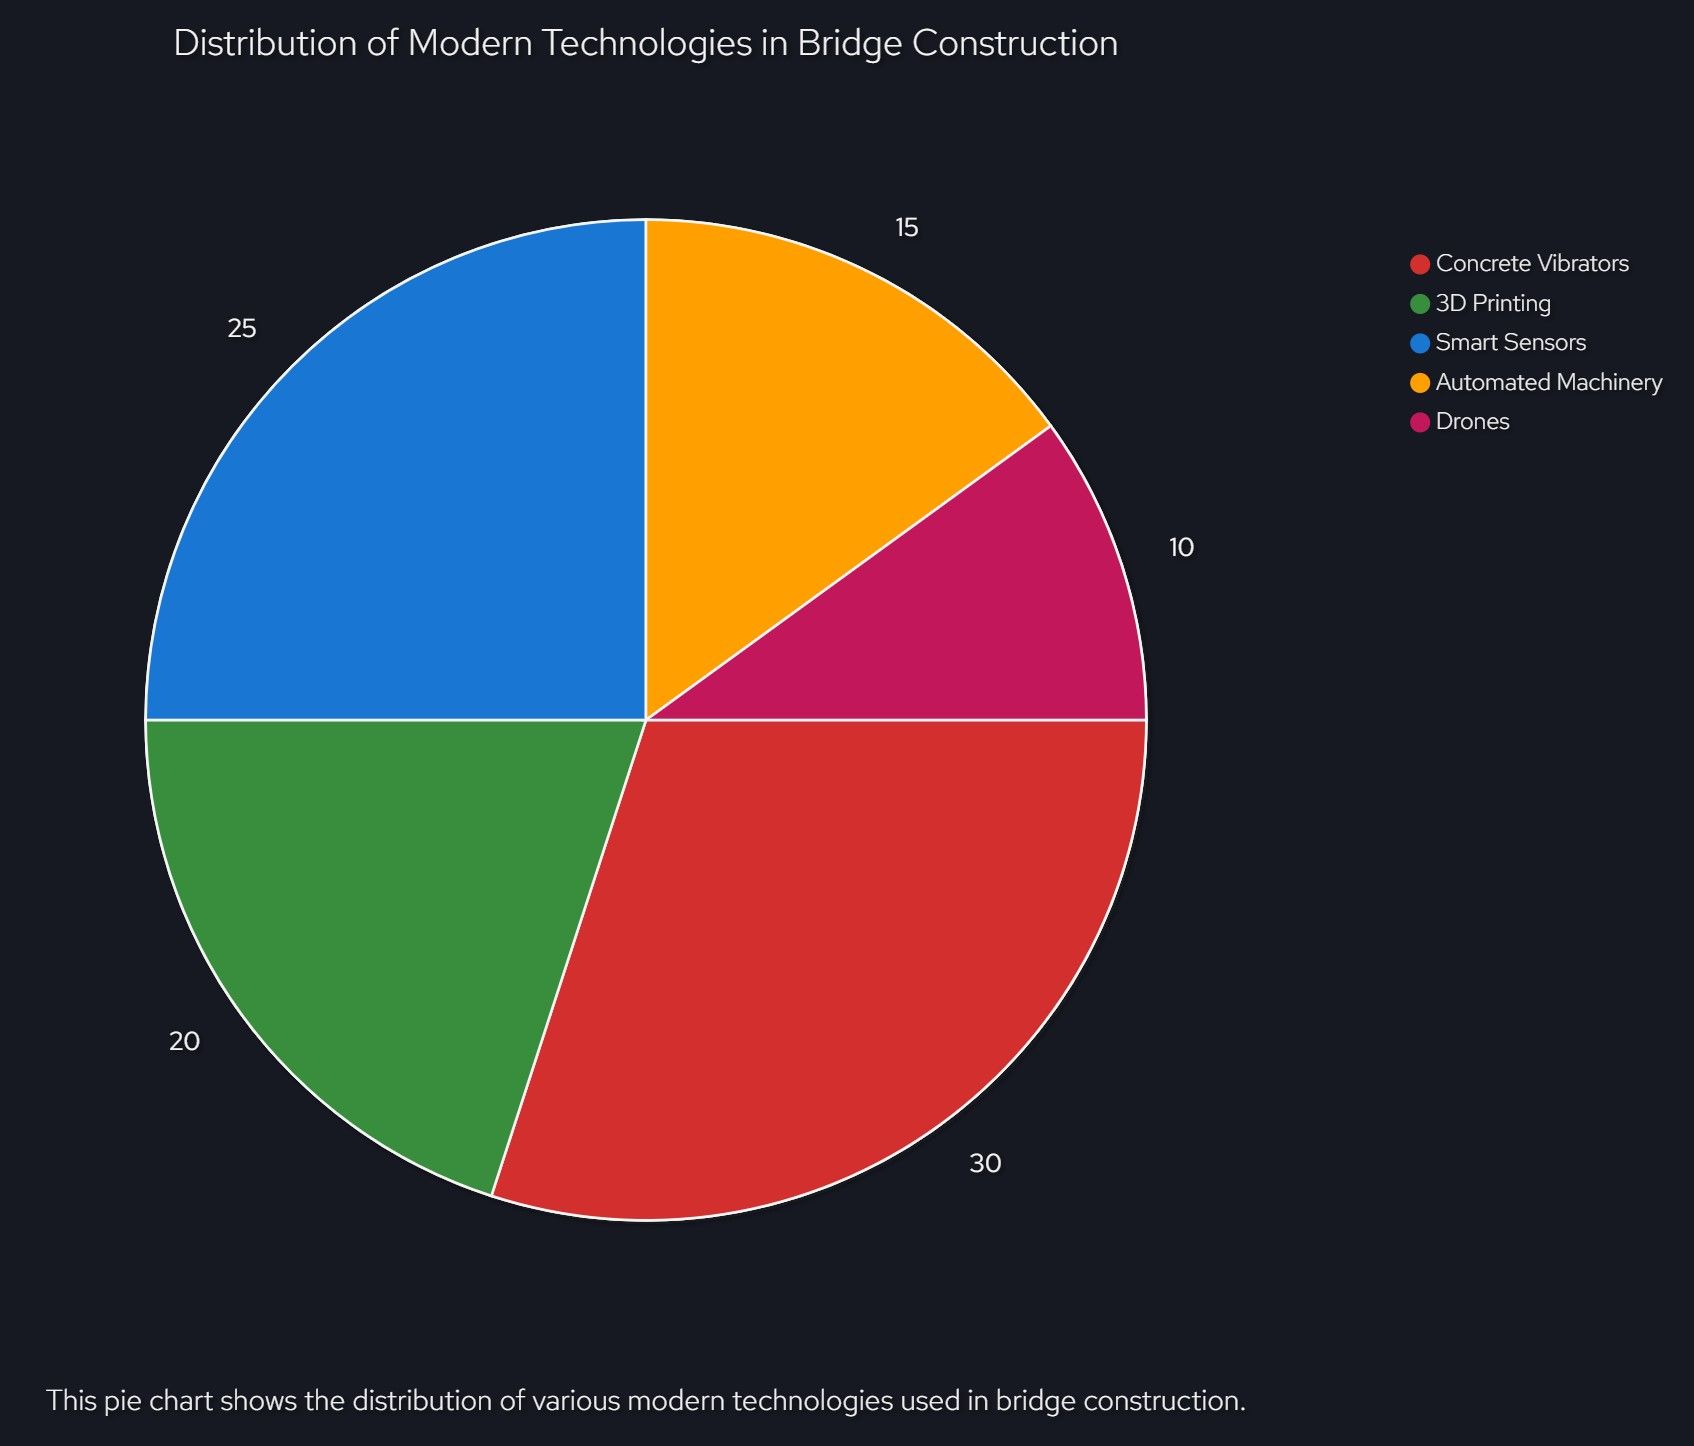 This pie chart shows the distribution of various modern technologies used in bridge construction. Concrete vibrators make up a significant portion, followed by smart sensors, 3D printing, automated machinery, and drones.